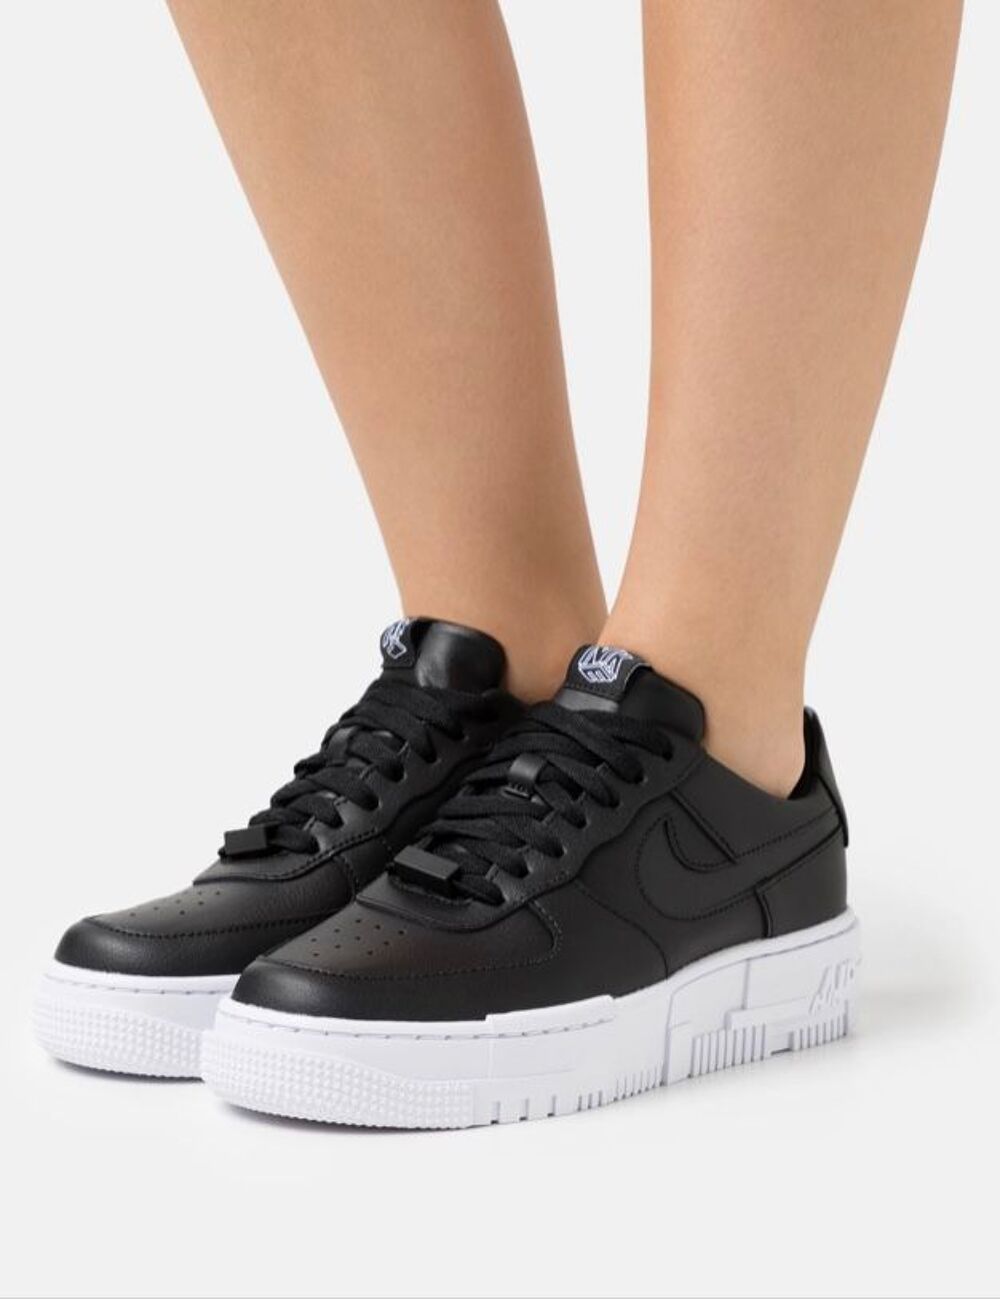 Nike air force one pixel noir Chaussures